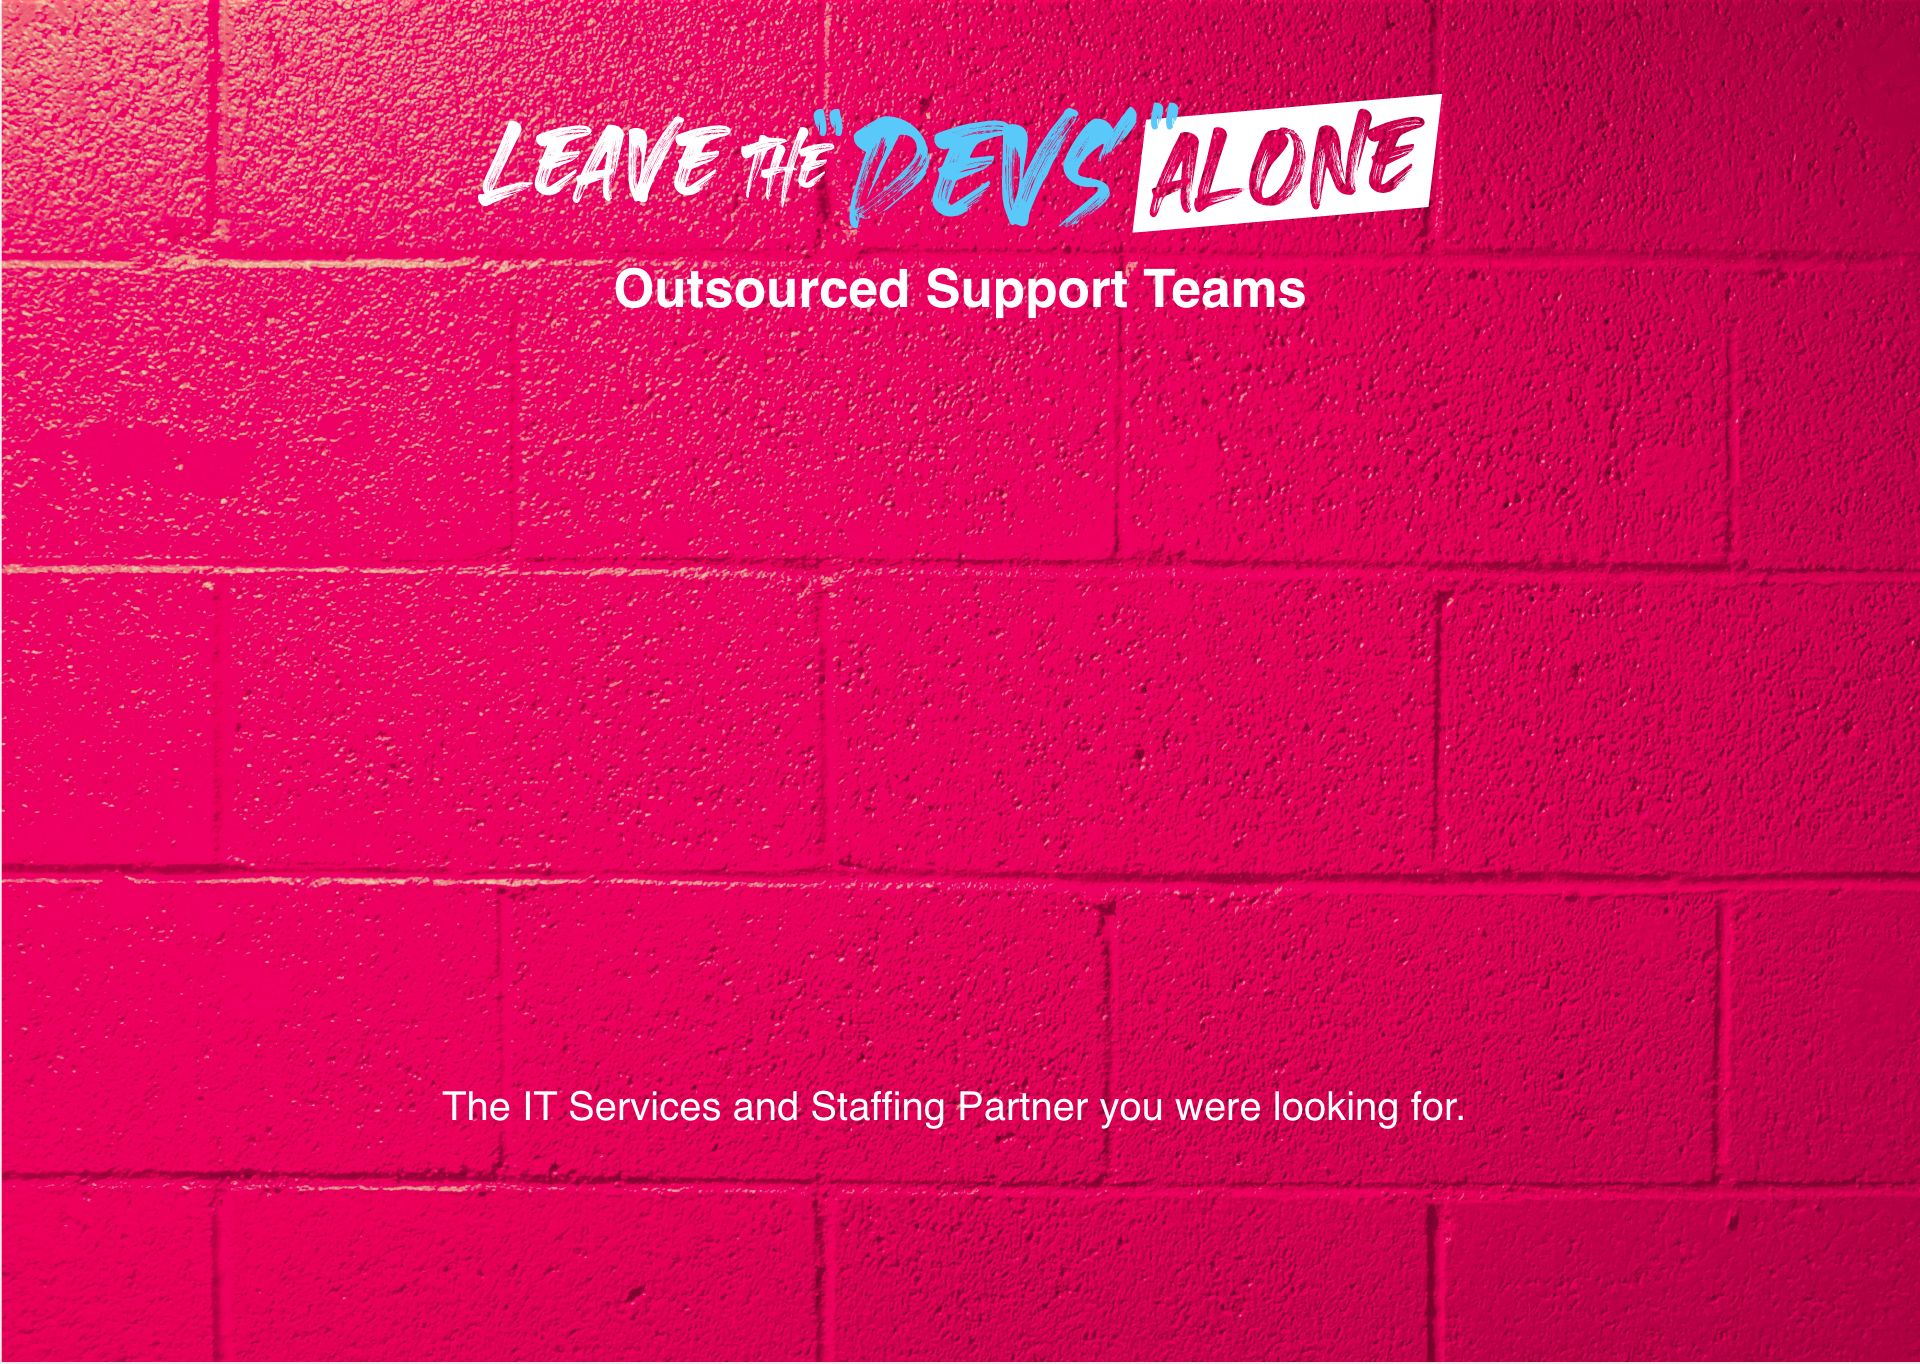 Outsourced Support Teams